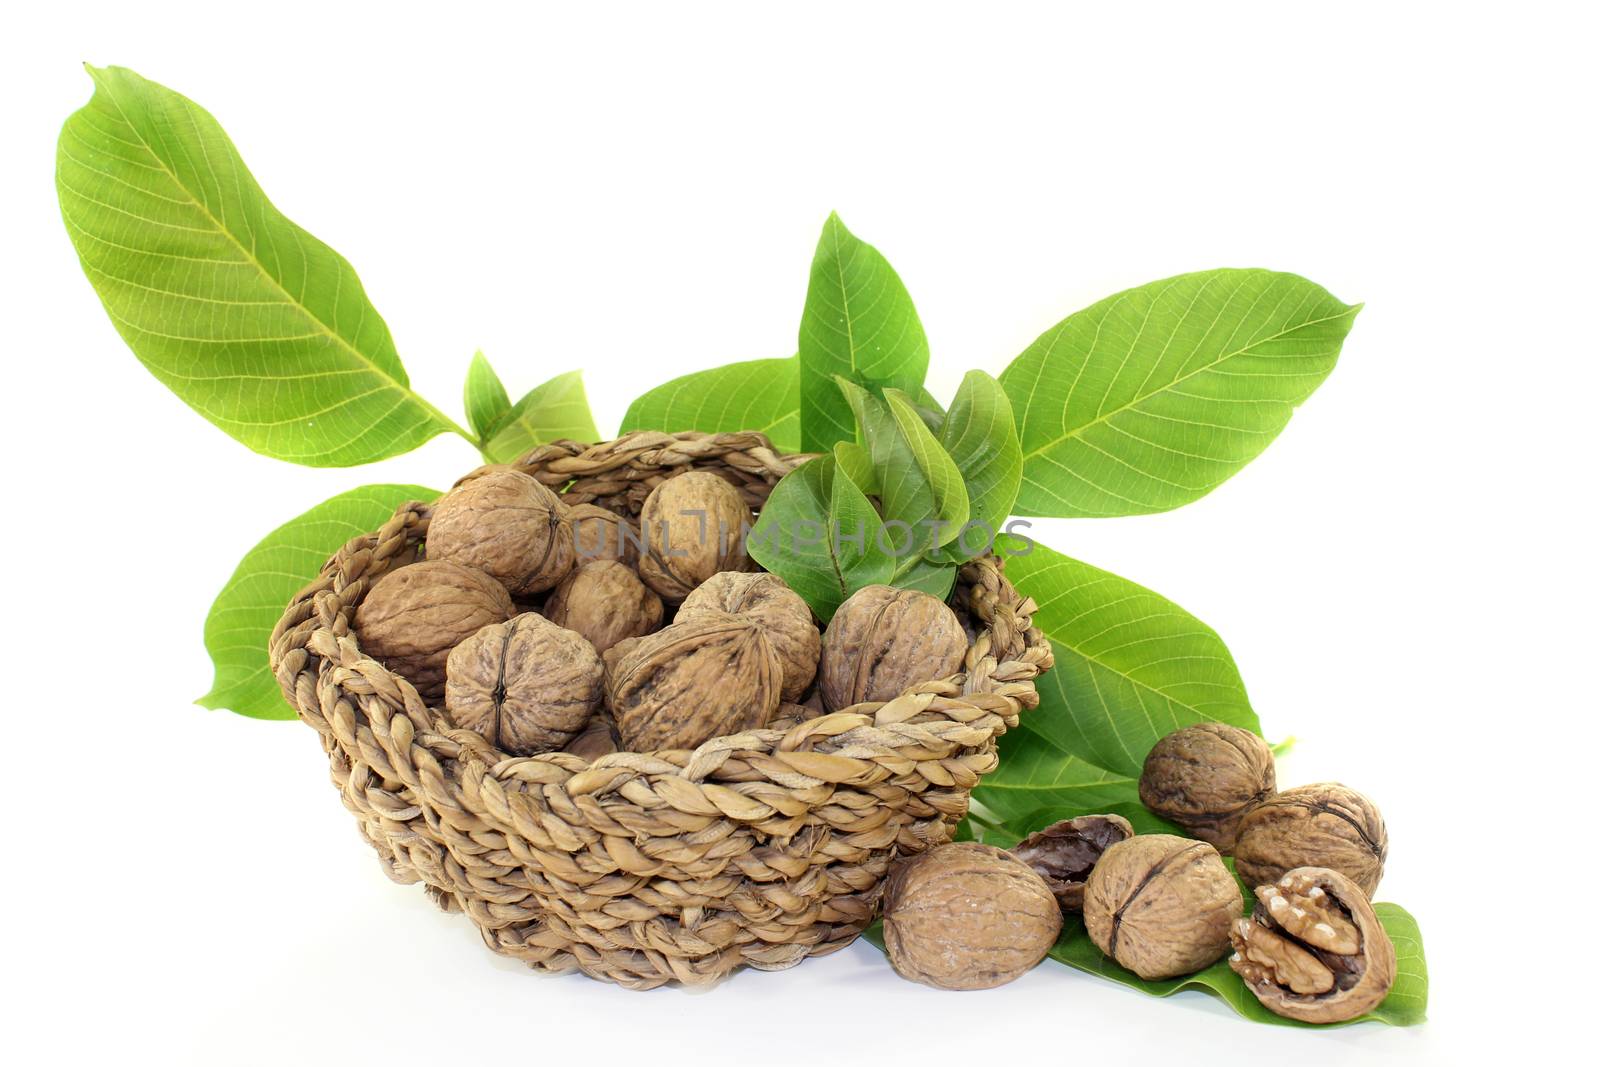 Walnut with walnut leaves on a bright background